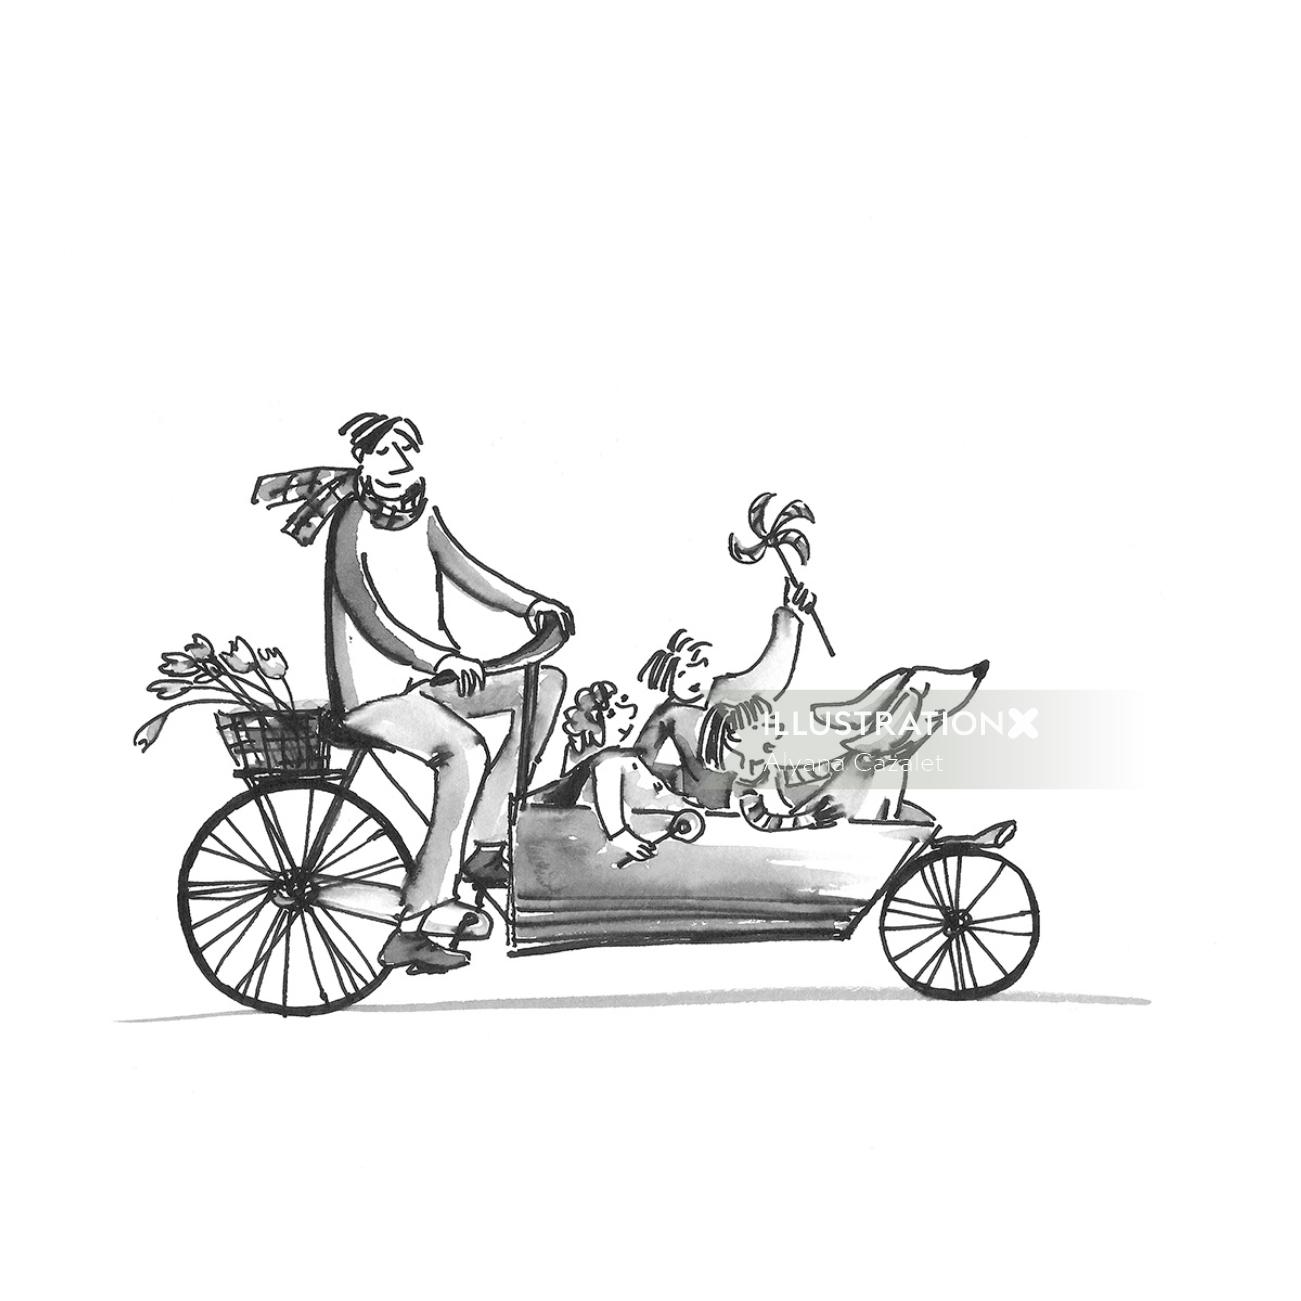 Line illustration of father with kids on the bike